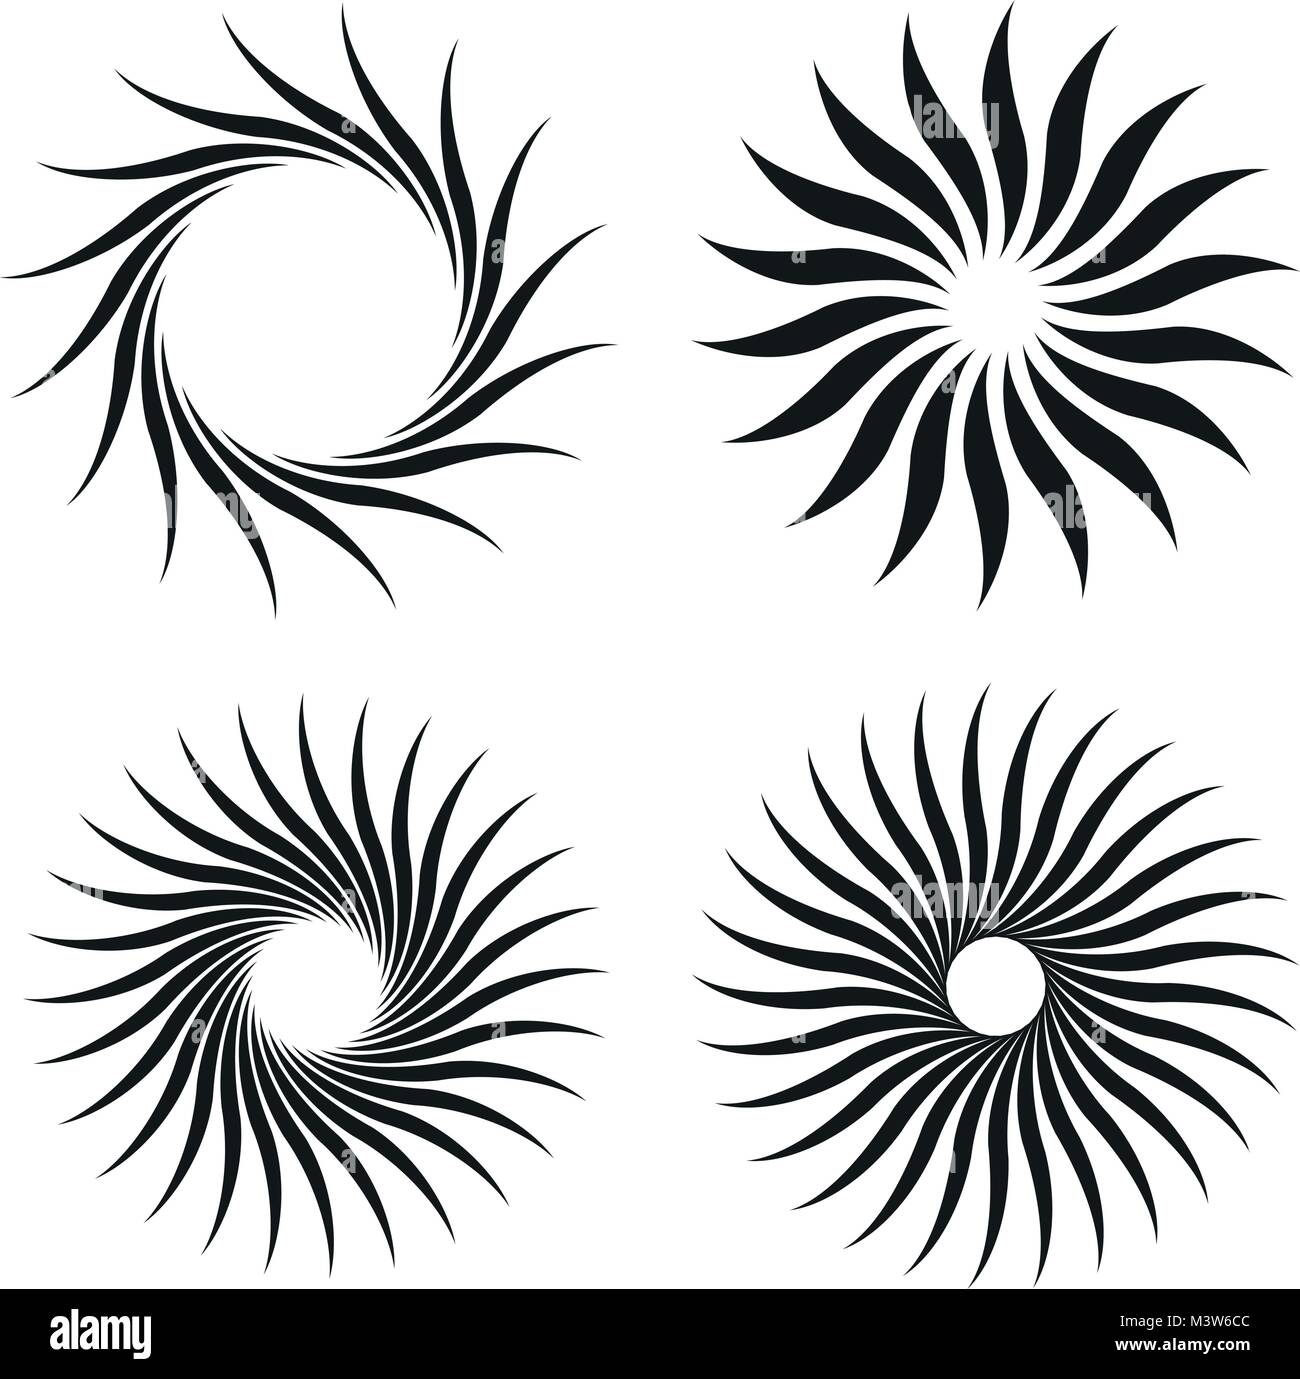 Sun shapes for logo or tatoo design isolated on white background Stock Vector